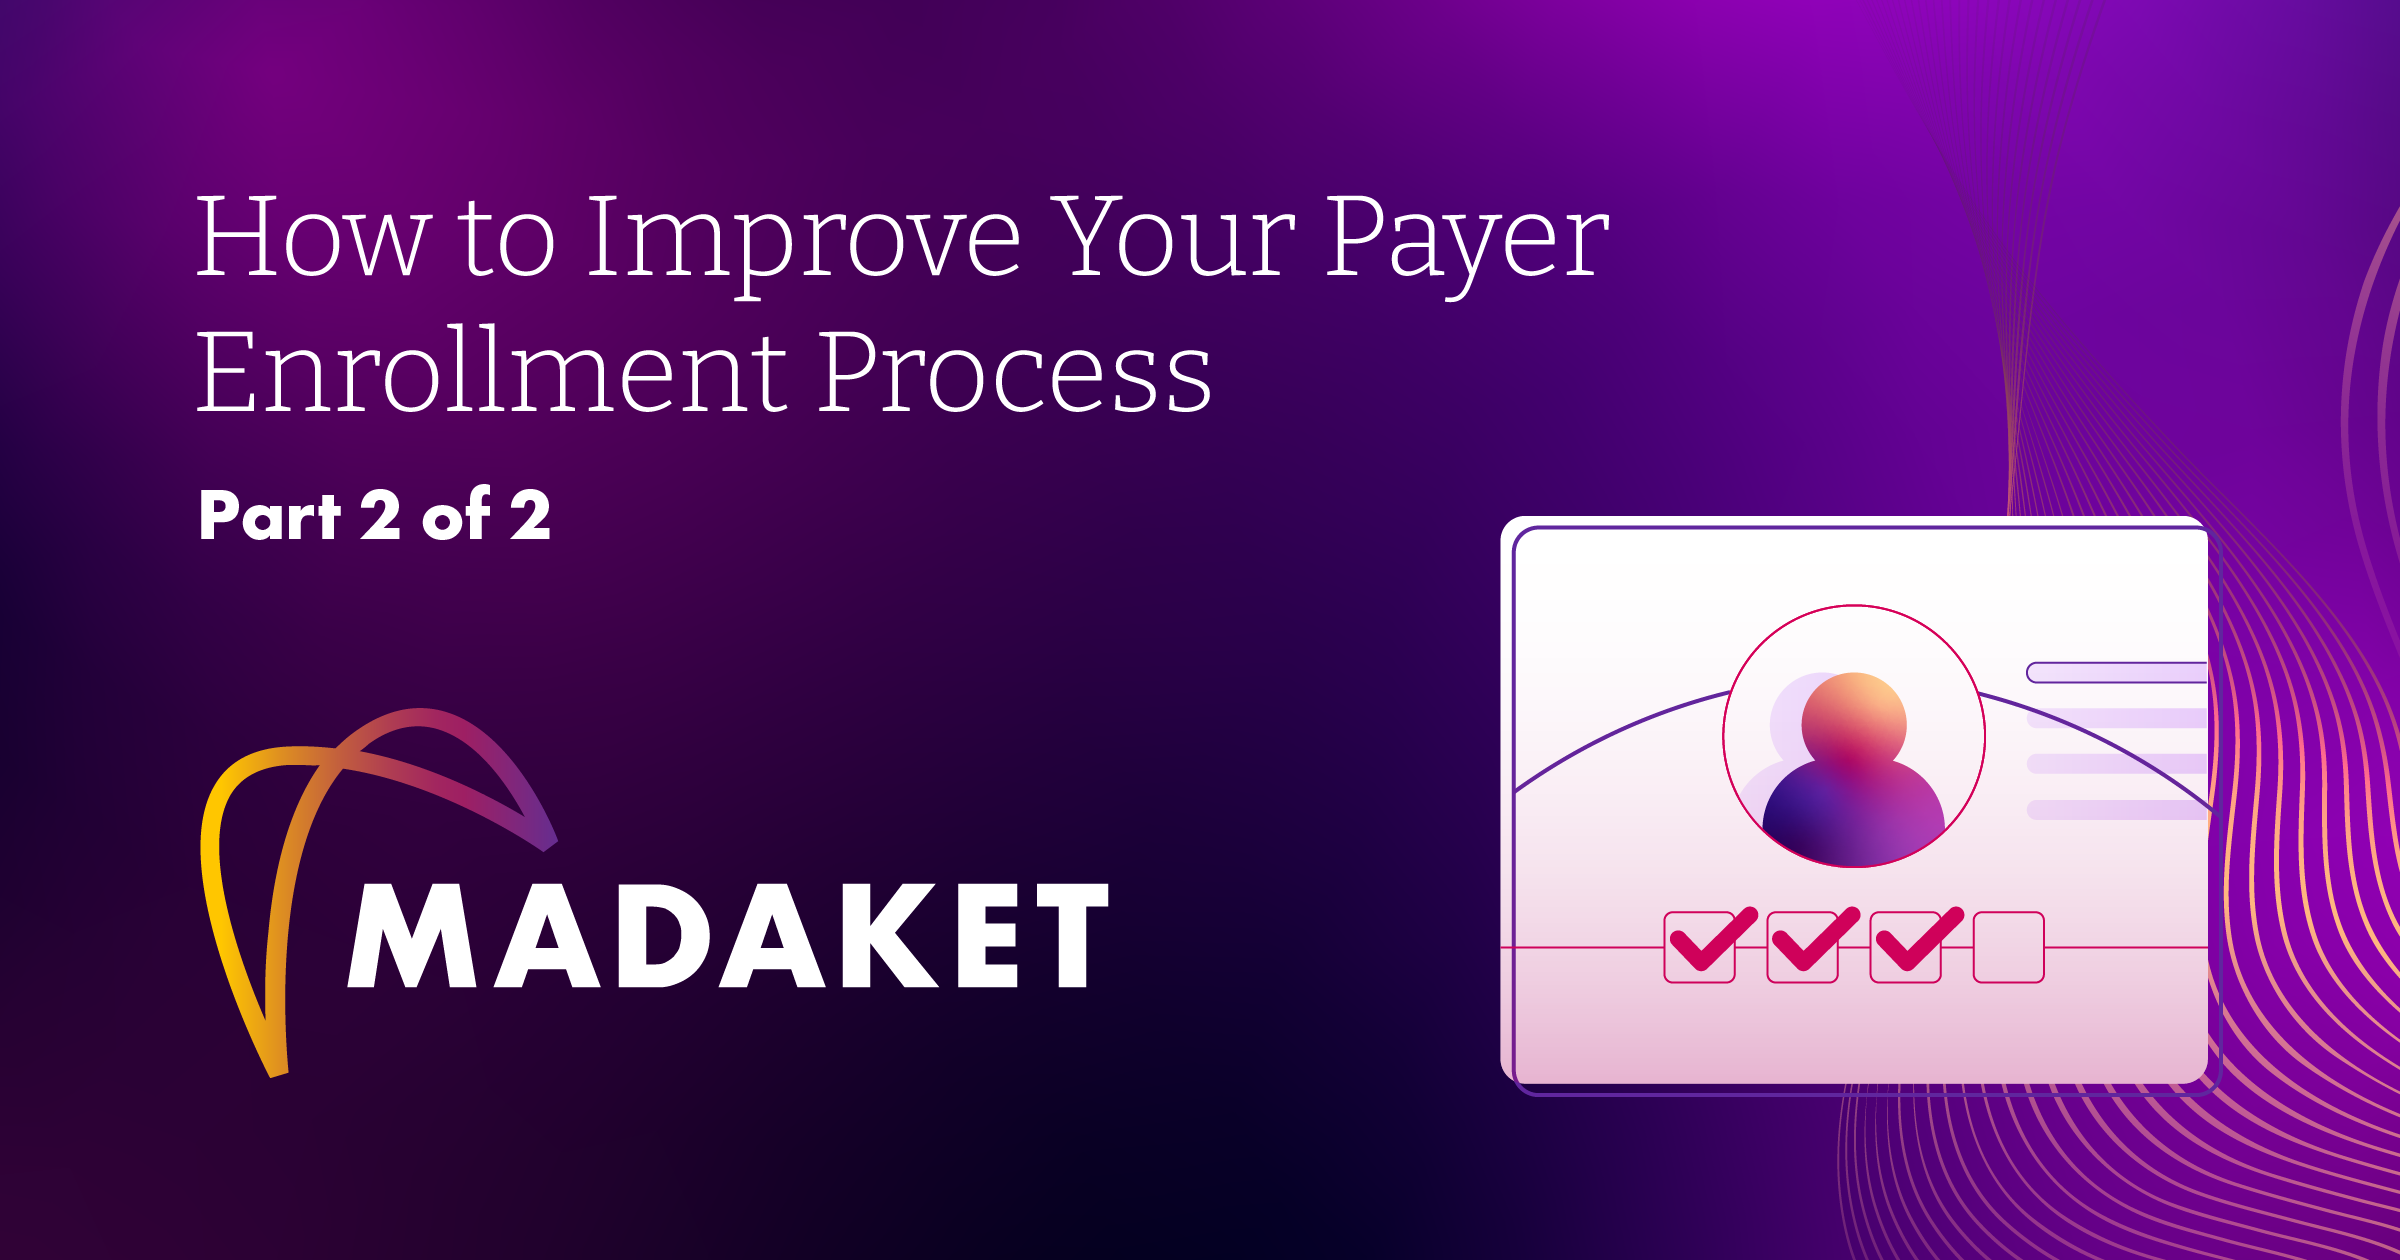 How to Improve Your Payer Enrollment Process (Part 2 of 2) cover image